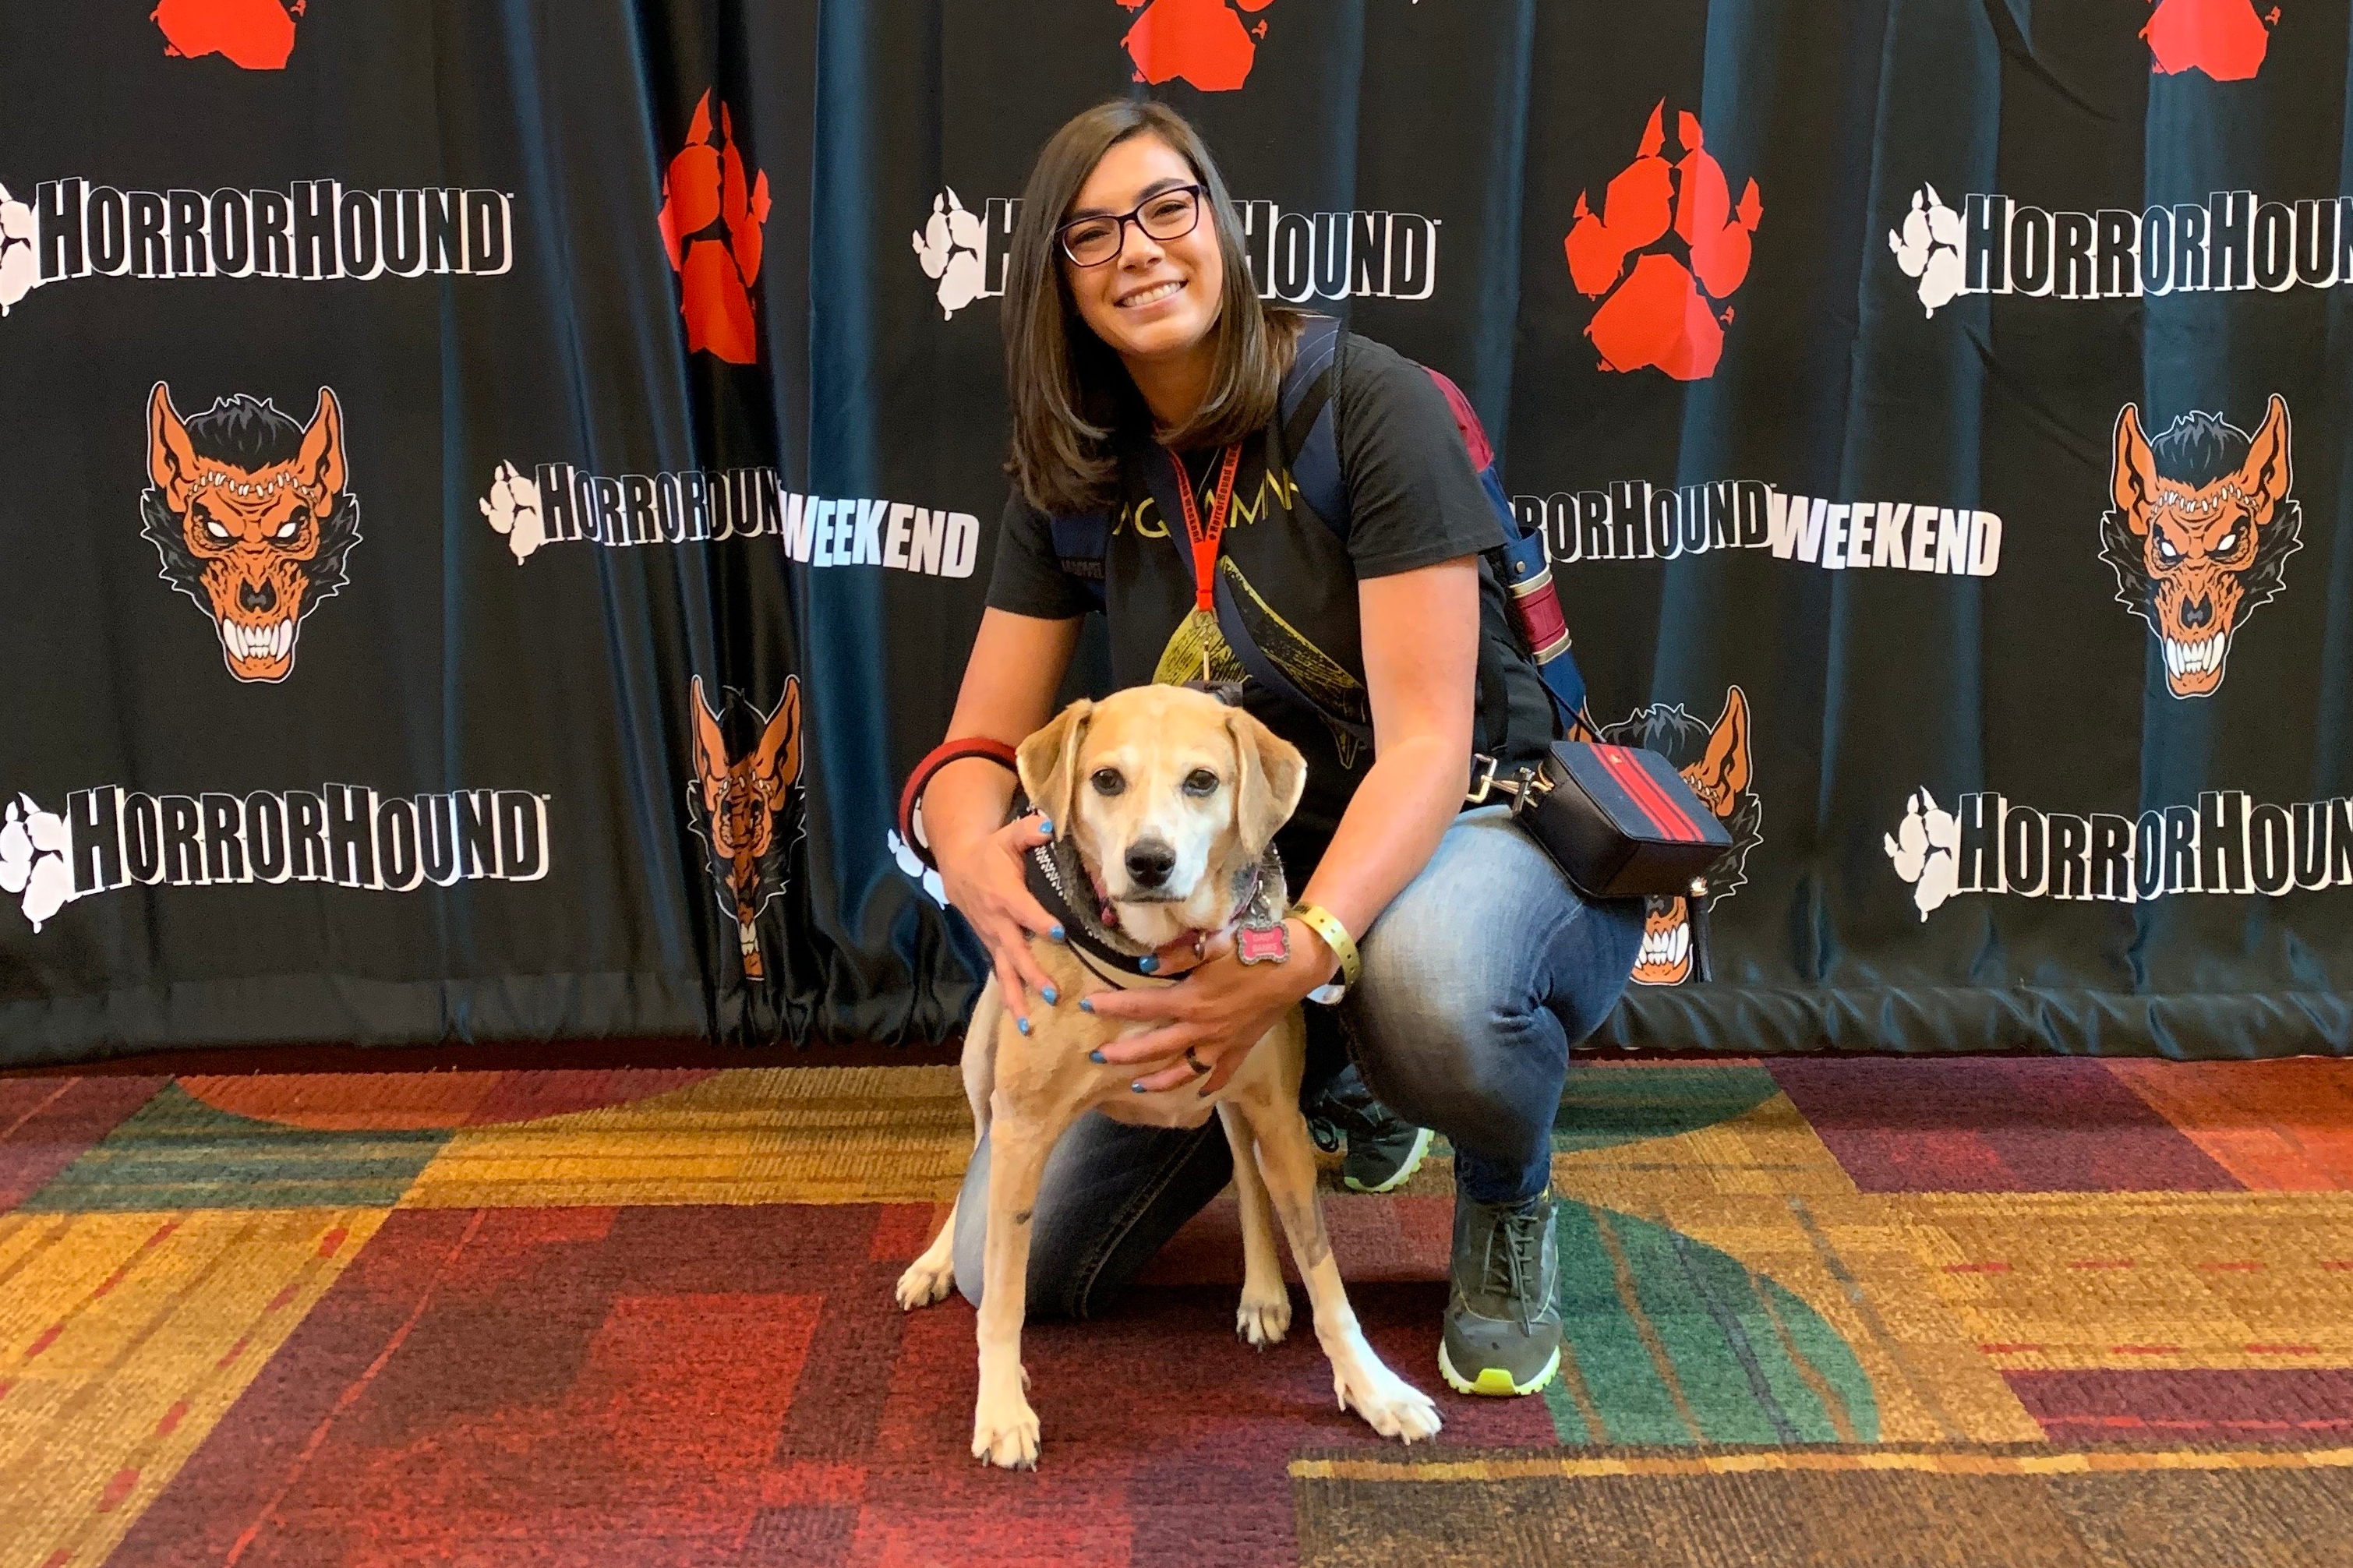 Me and my service dog at a horror film convention. We are posing.